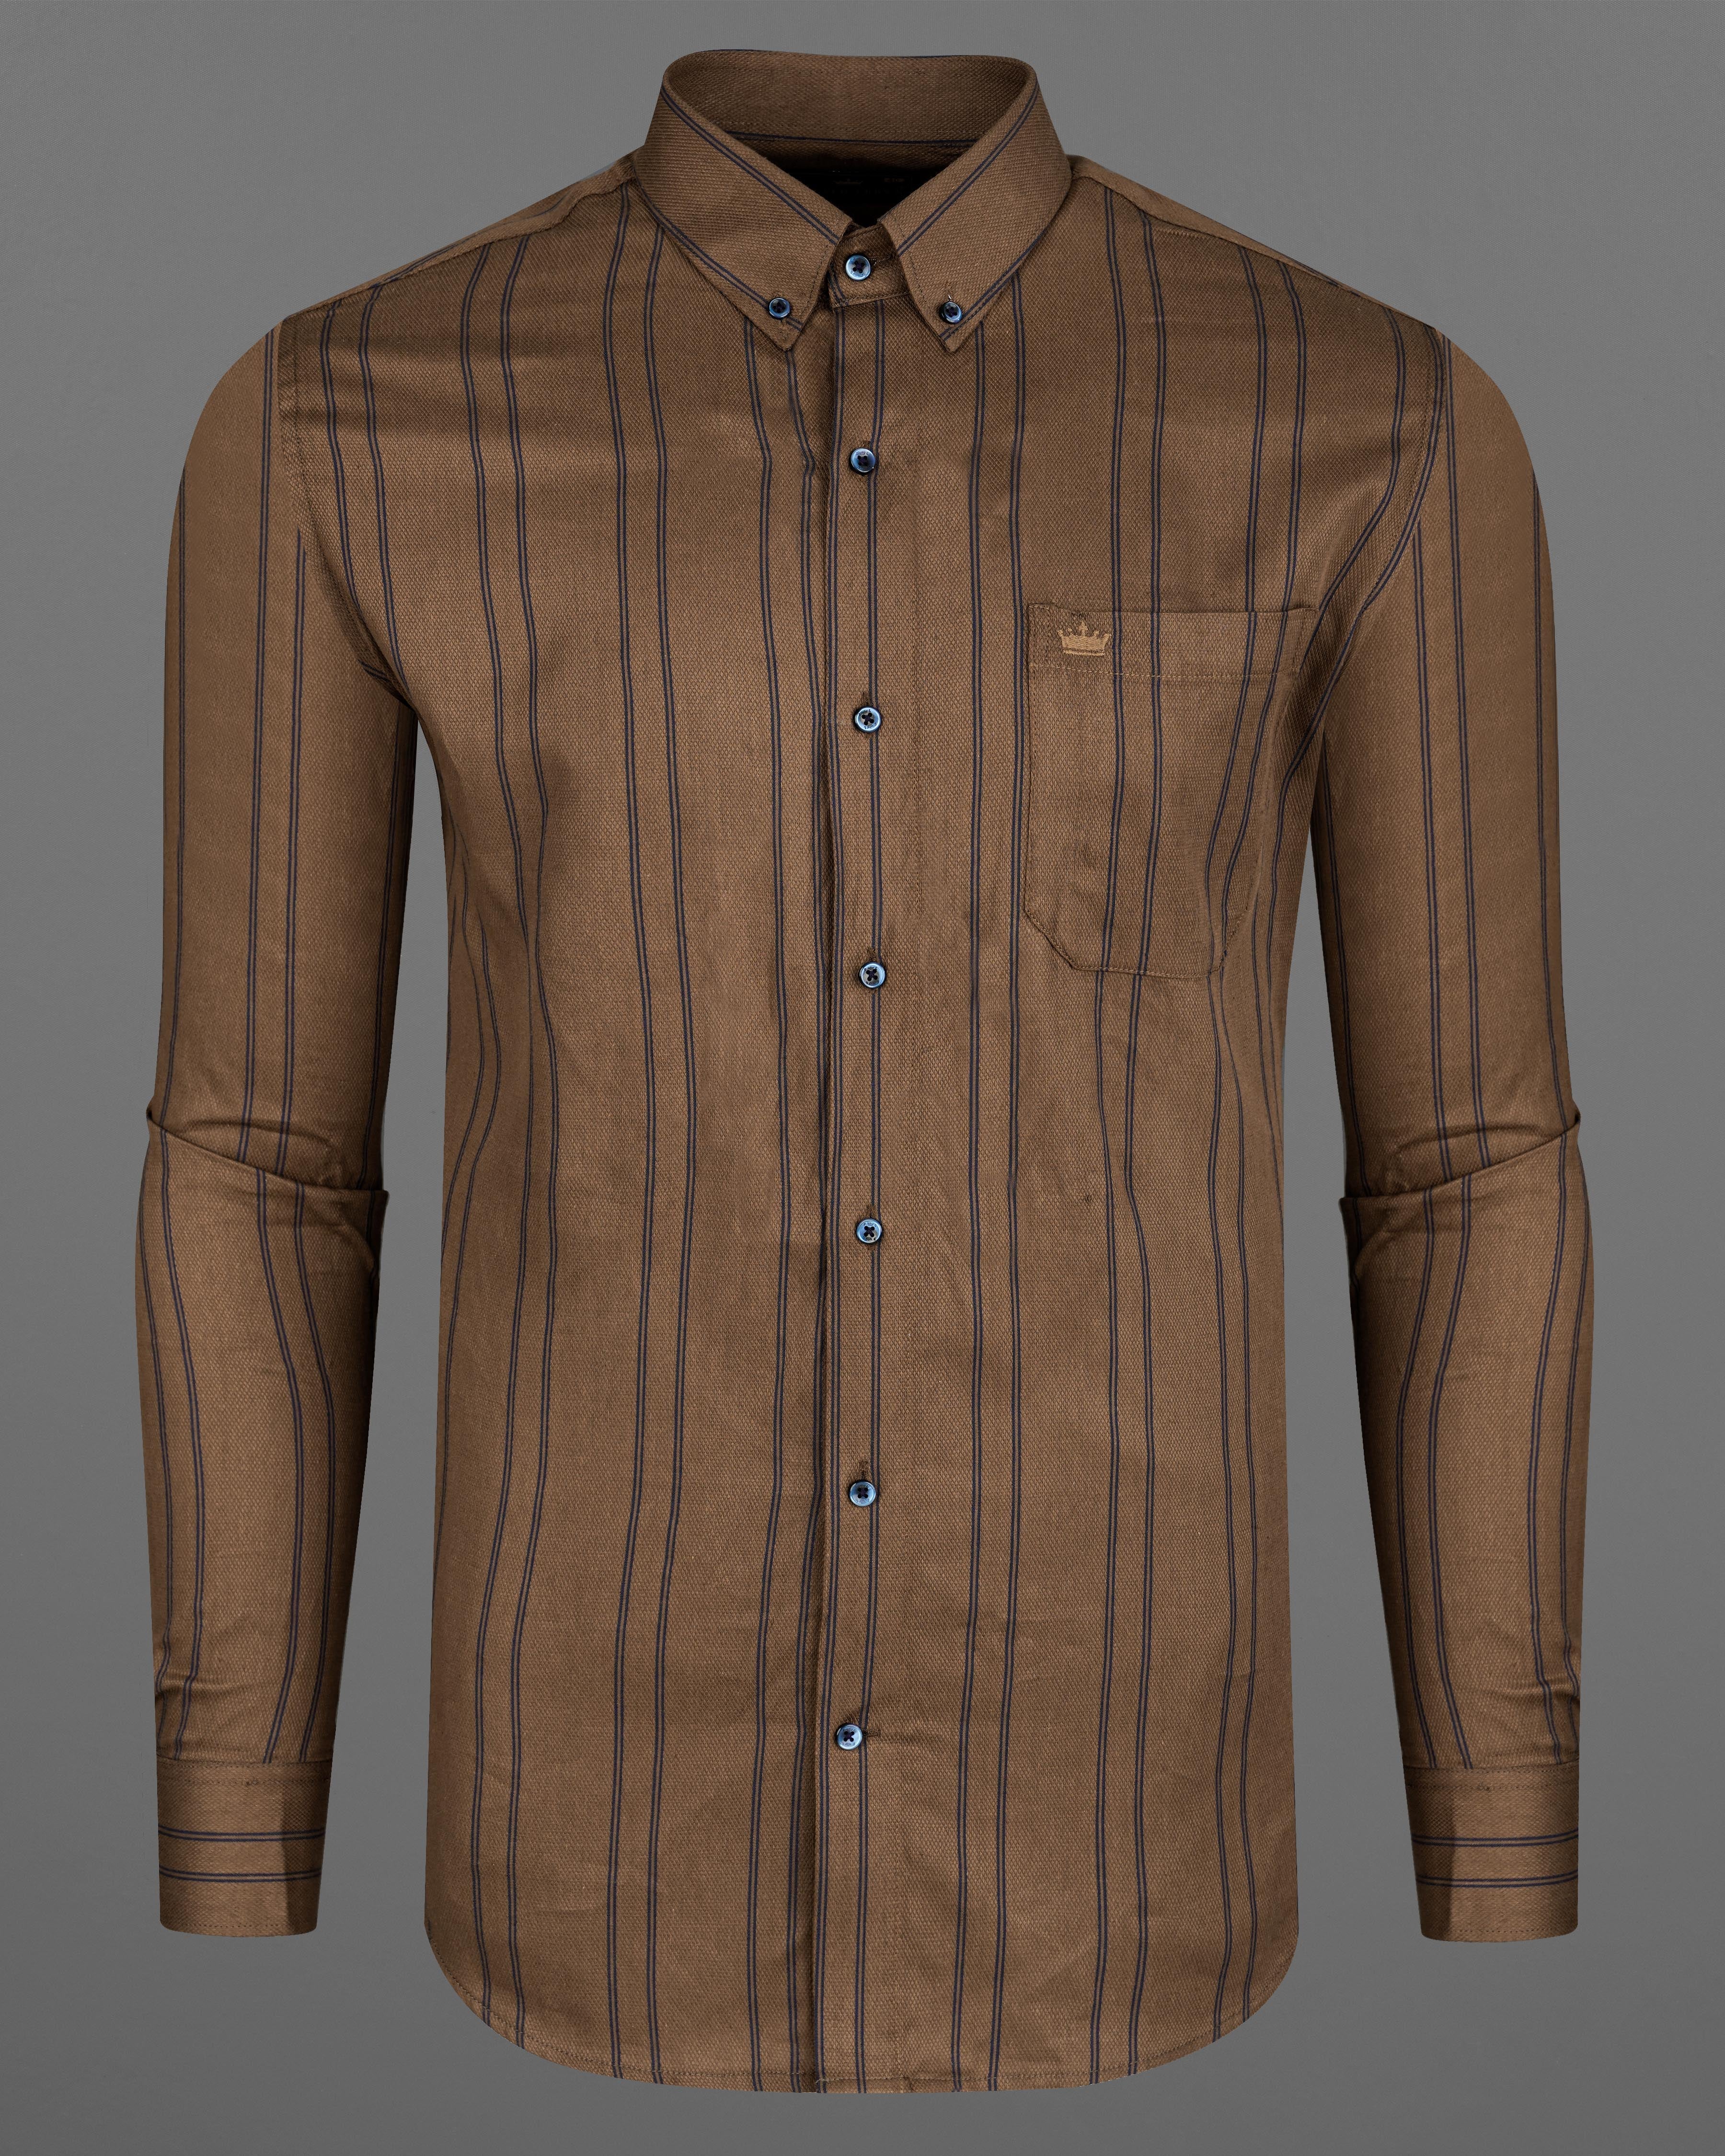 Potter Clay Brown with Ebony Clay Navy Blue Striped Dobby Textured Premium Giza Cotton Shirt 8097-BD-BLE-38, 8097-BD-BLE-H-38, 8097-BD-BLE-39, 8097-BD-BLE-H-39, 8097-BD-BLE-40, 8097-BD-BLE-H-40, 8097-BD-BLE-42, 8097-BD-BLE-H-42, 8097-BD-BLE-44, 8097-BD-BLE-H-44, 8097-BD-BLE-46, 8097-BD-BLE-H-46, 8097-BD-BLE-48, 8097-BD-BLE-H-48, 8097-BD-BLE-50, 8097-BD-BLE-H-50, 8097-BD-BLE-52, 8097-BD-BLE-H-52